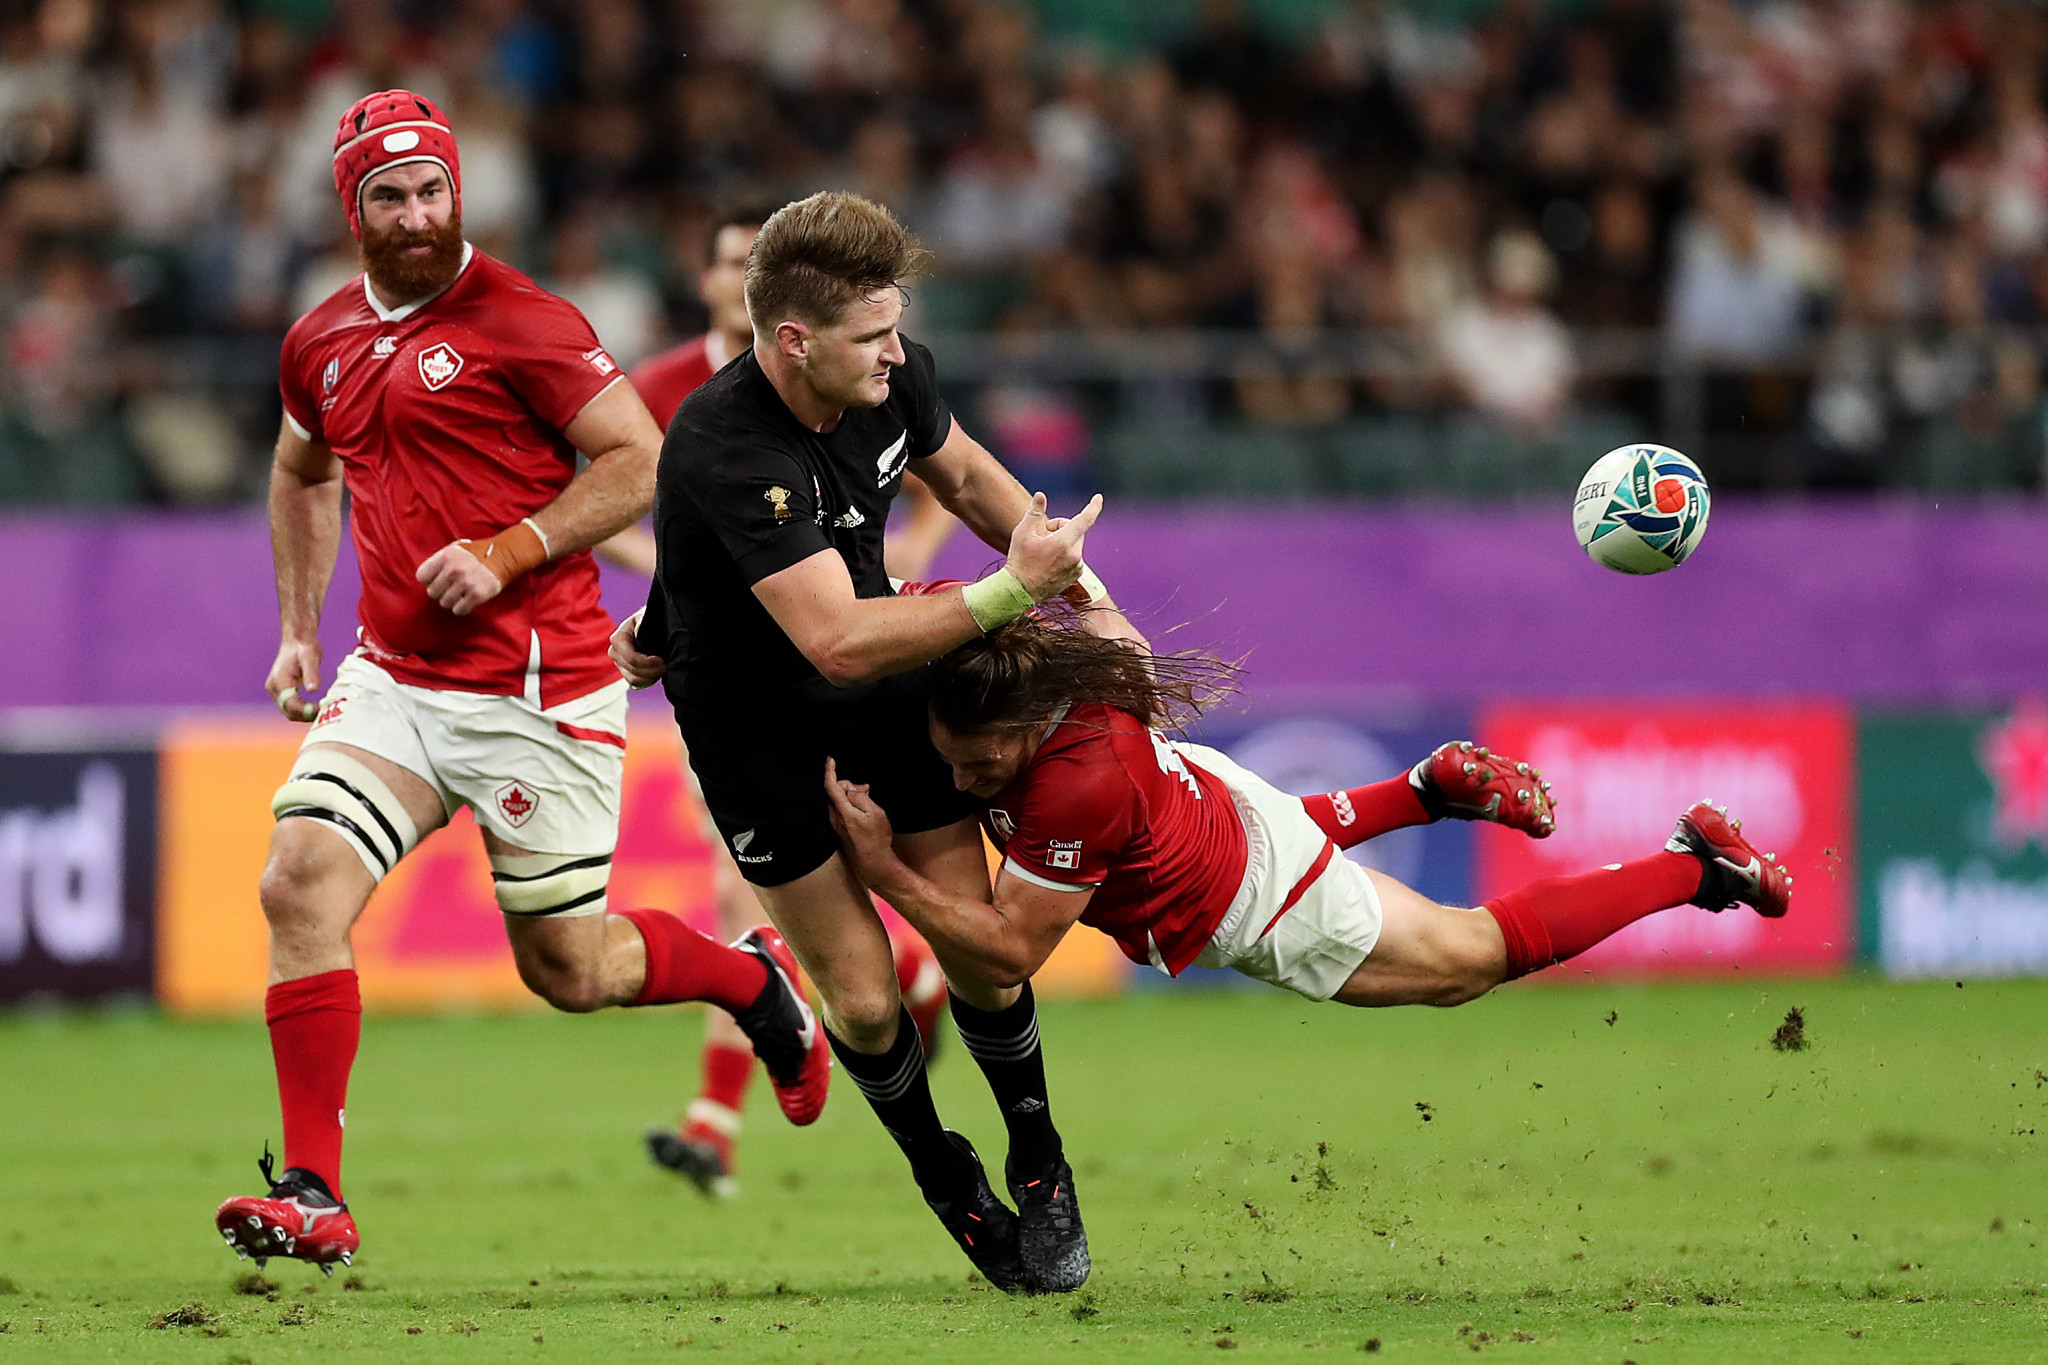 The All Blacks are simply brilliant at recycling possession, illustrated here by the always cool Jordie Barrett ©Getty Images